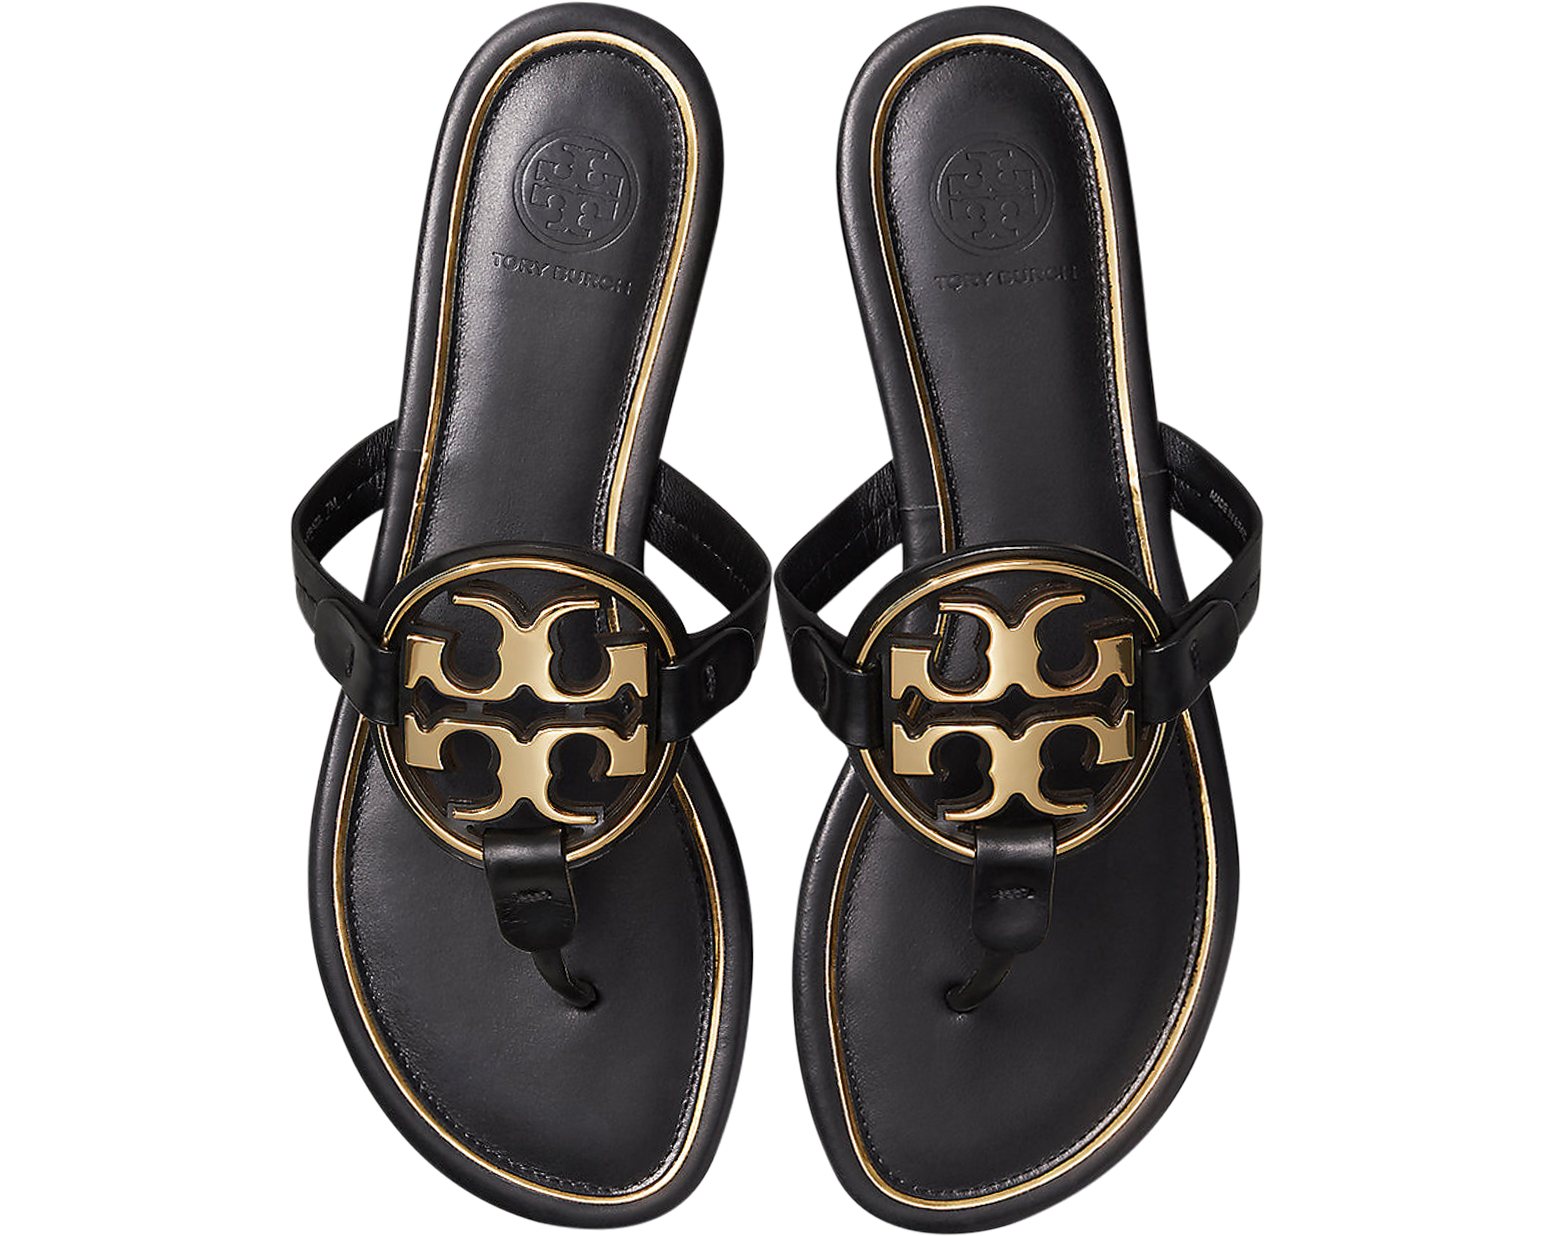 Tory Burch Perfect Black Metal Miller Sandals 5 US at FORZIERI